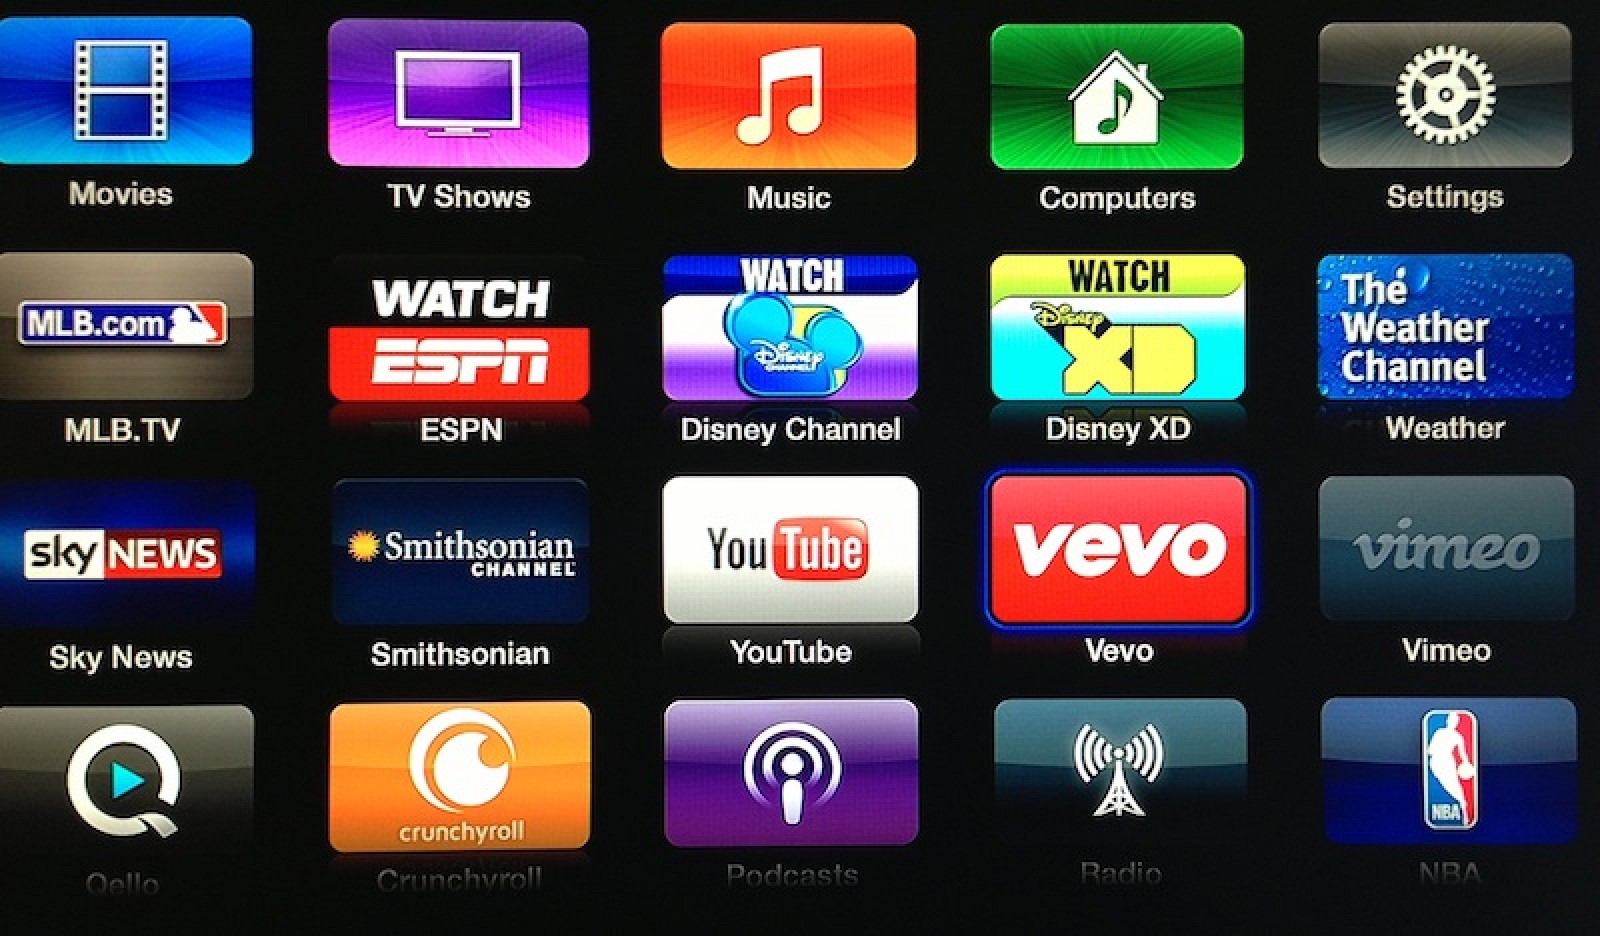 Apple TV Adds Apps for Vevo, Weather Channel, Disney, and Smithsonian